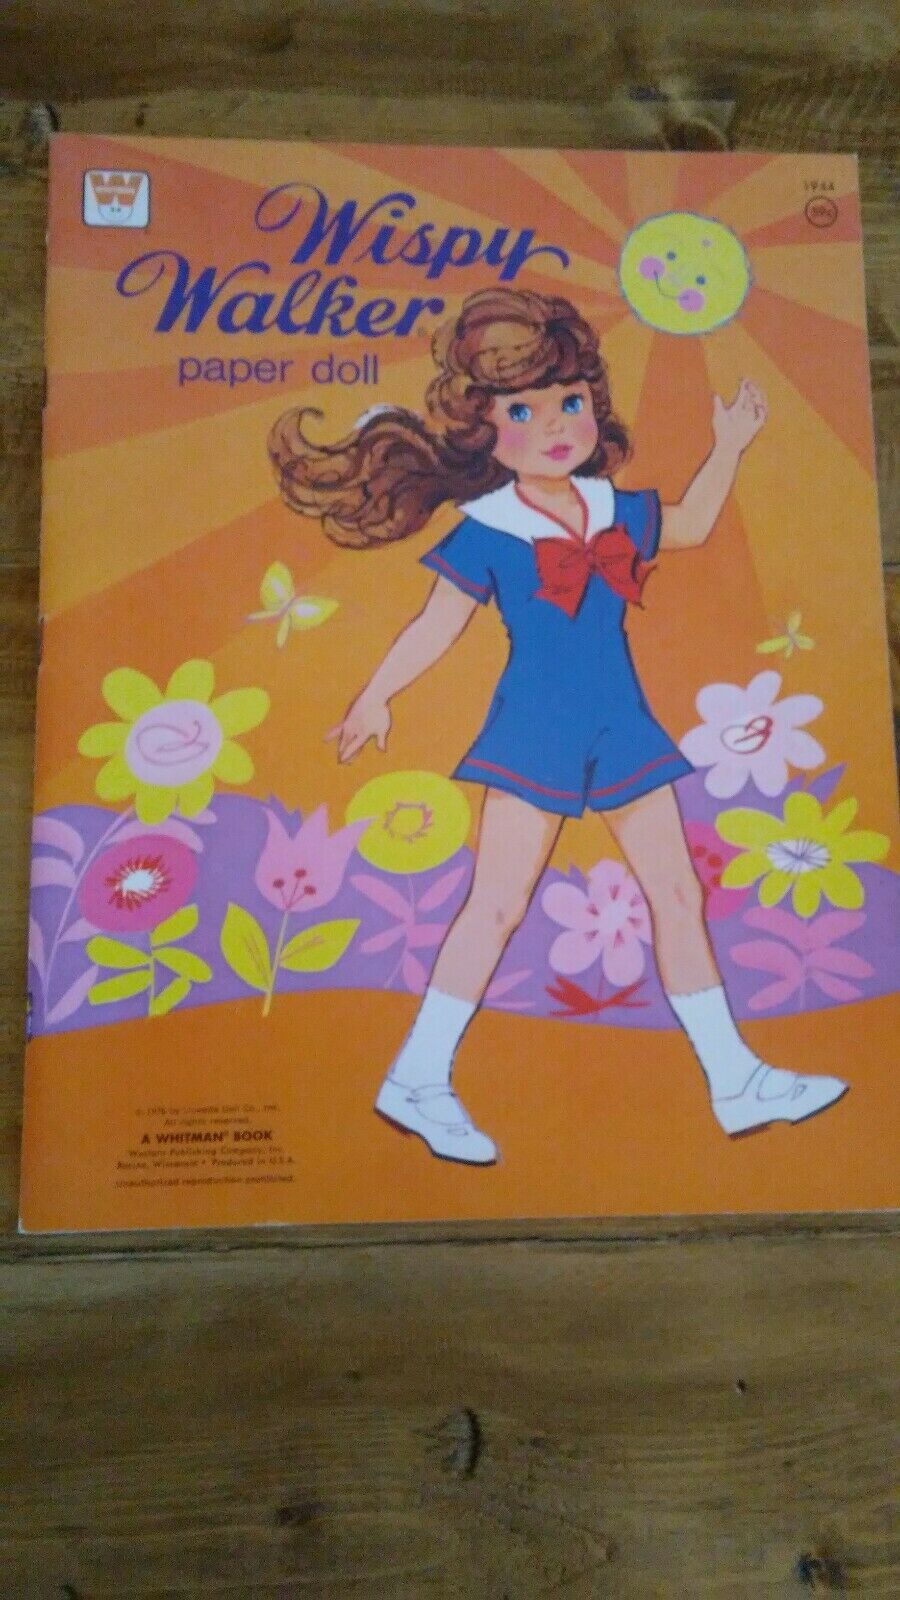 Vintage Punch Out Paper Doll Book ~wispy Walker Paper Doll~1976~nice!~whitman